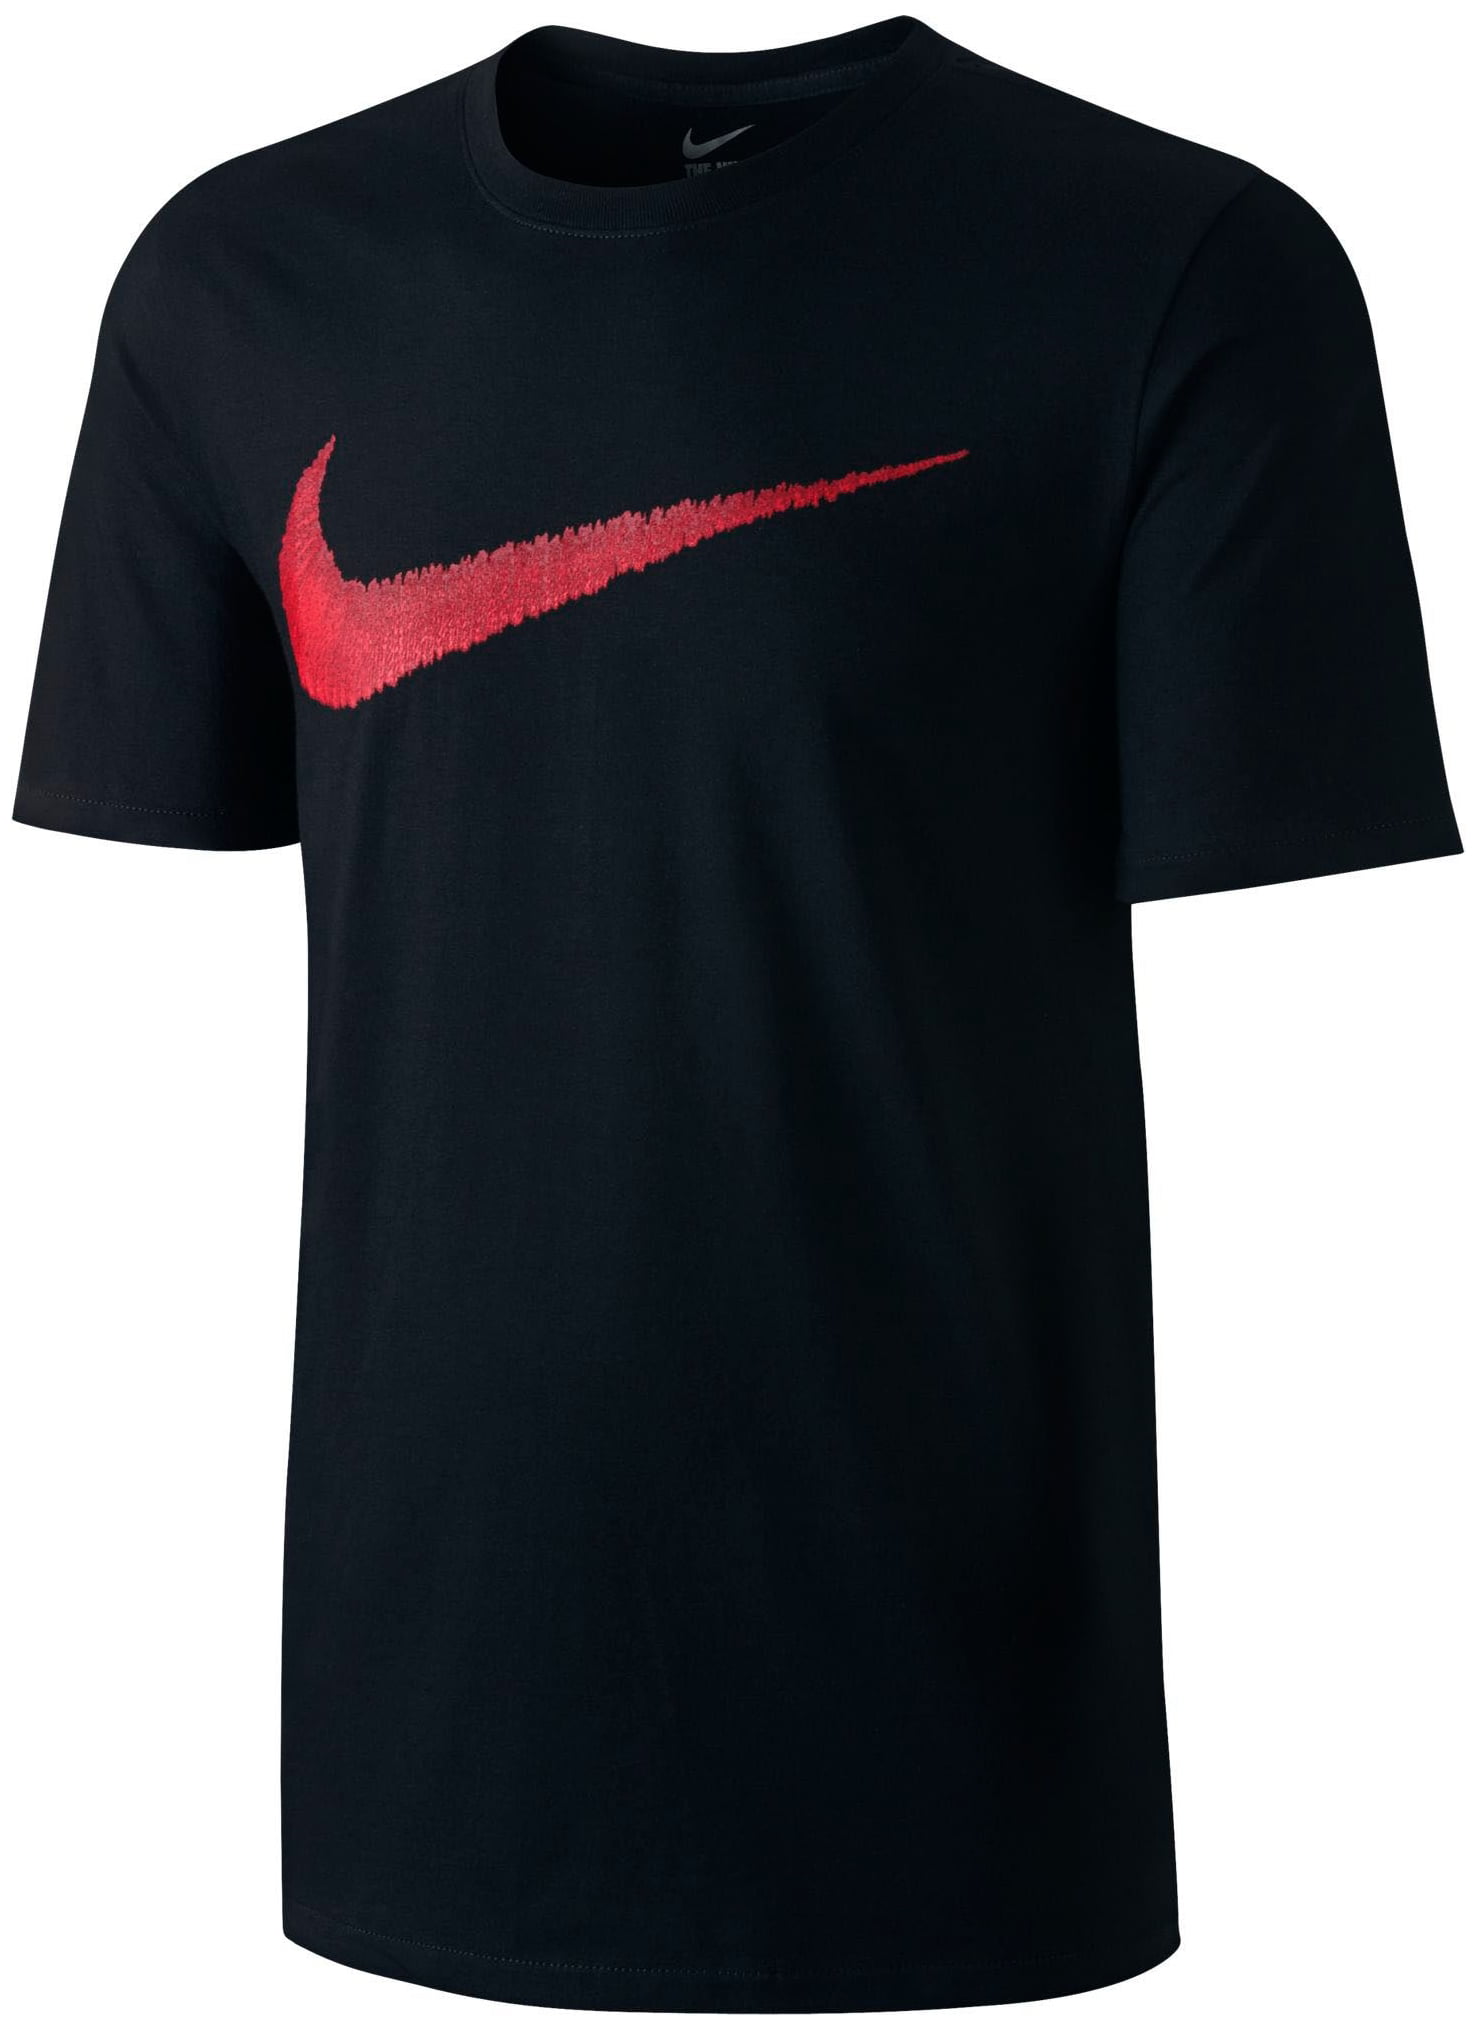 nike men's hangtag swoosh graphic t-shirt - black/gym red - size s ...